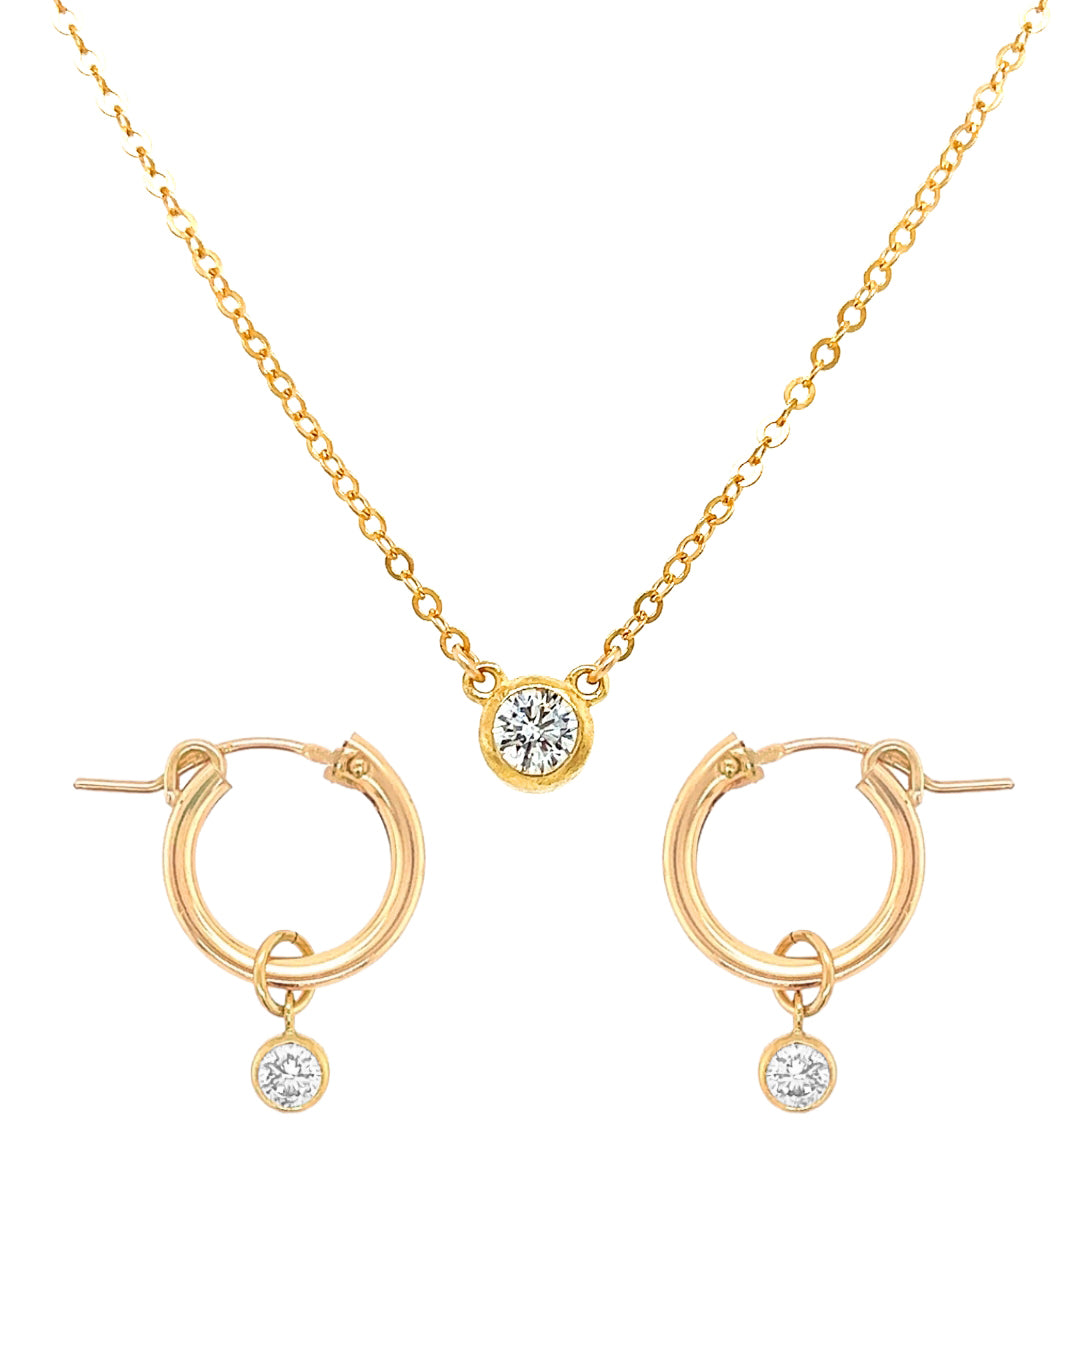 Classic Solitaire Necklace and Earrings Set